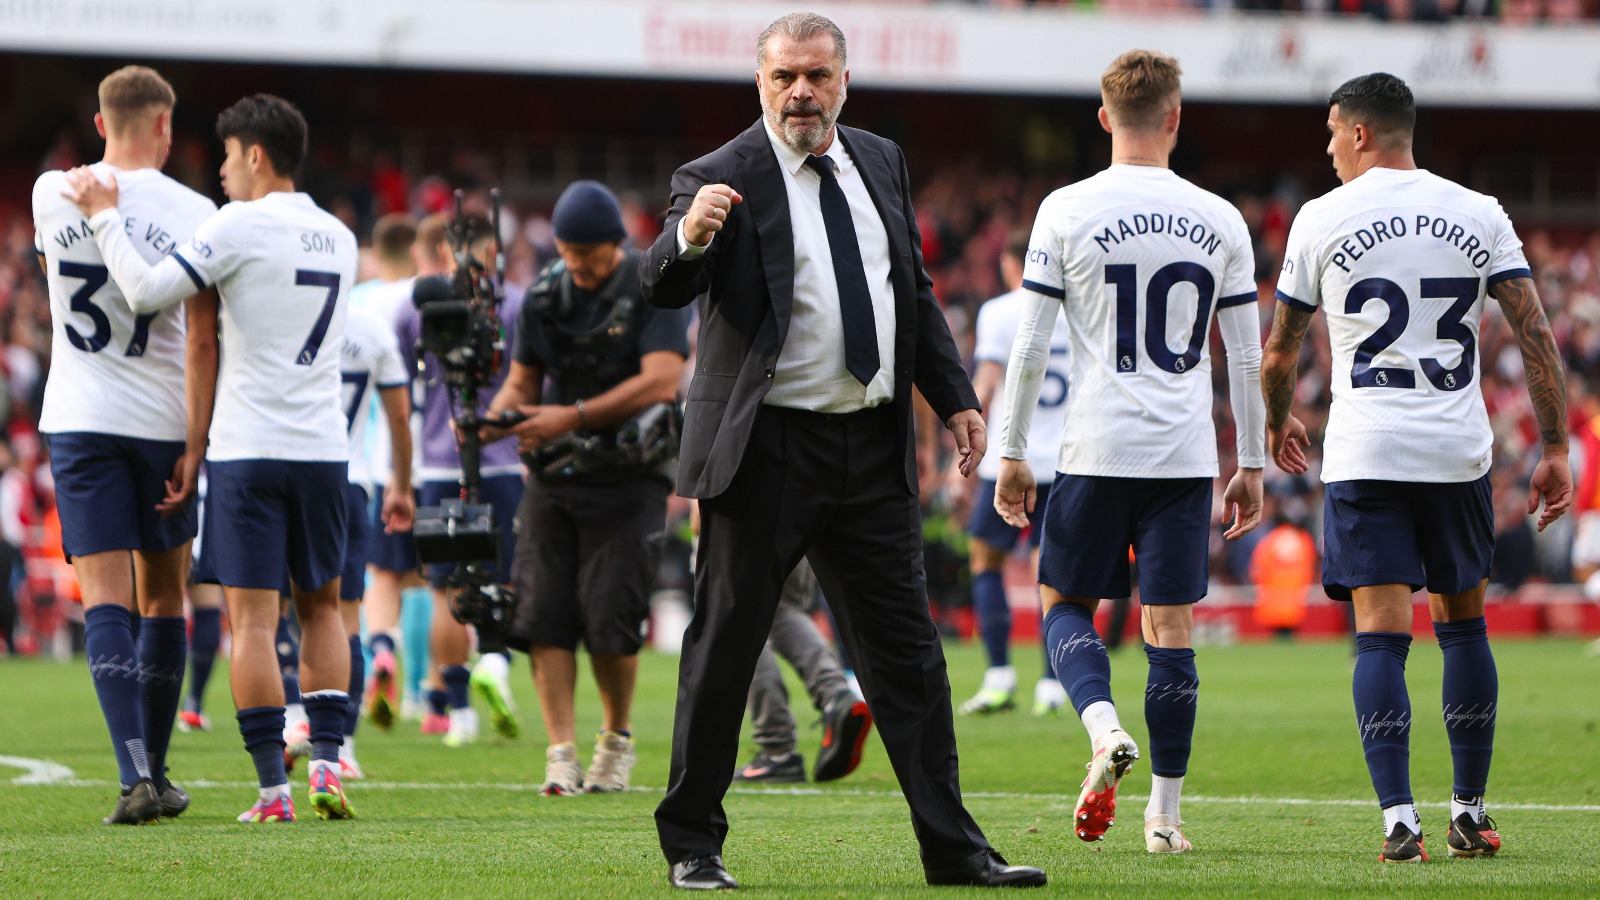 Here goes: Five reasons why Spurs could definitely win the Premier League